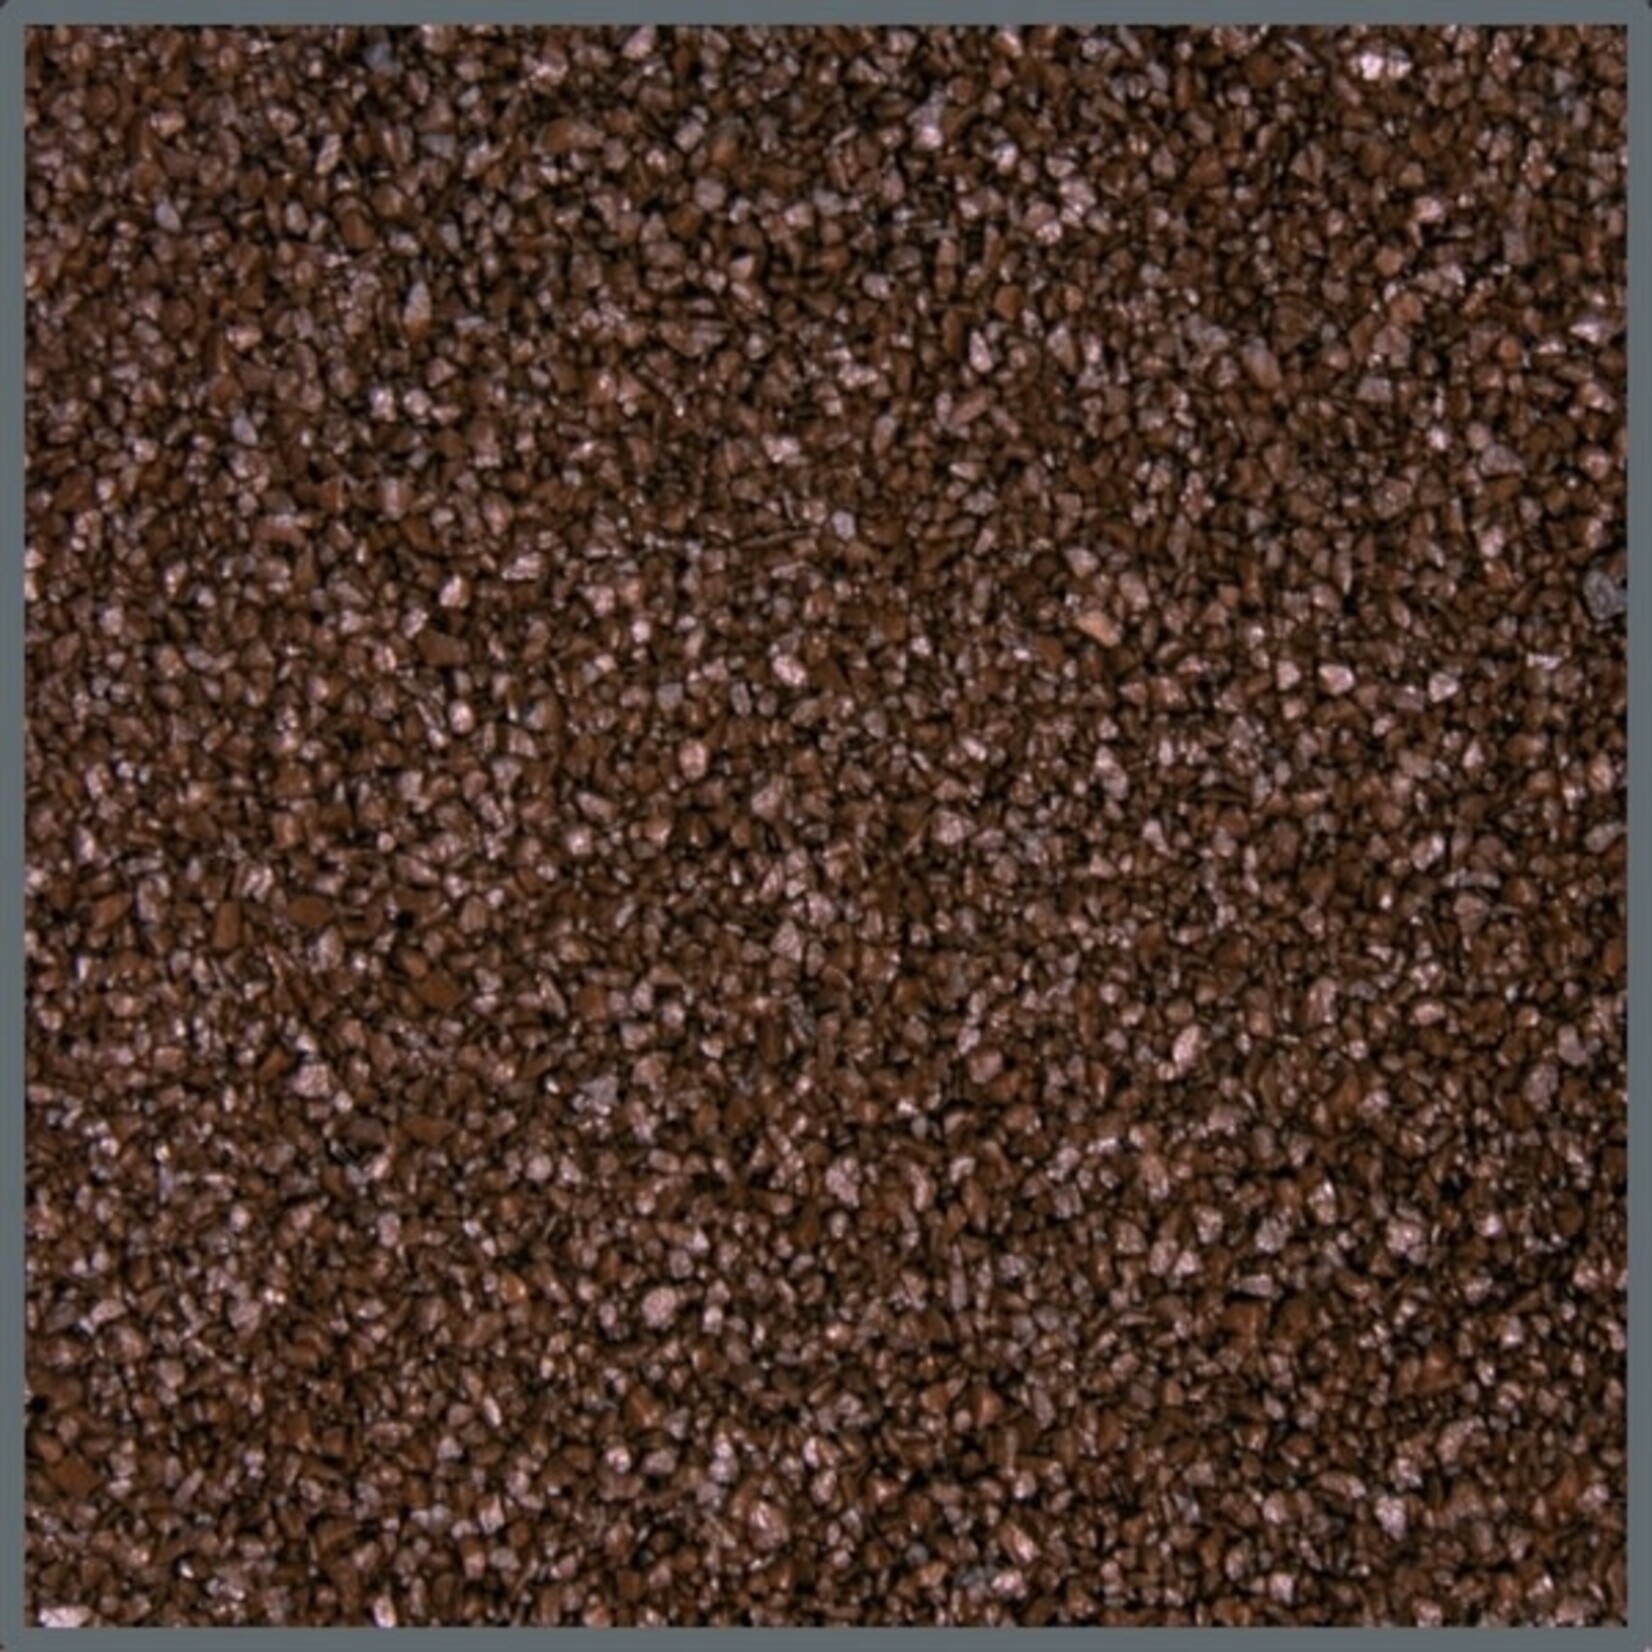 Dupla DUPLA GROUND COLOUR BROWN CHOCOLATE 0.5-1.4 MM 10 KG